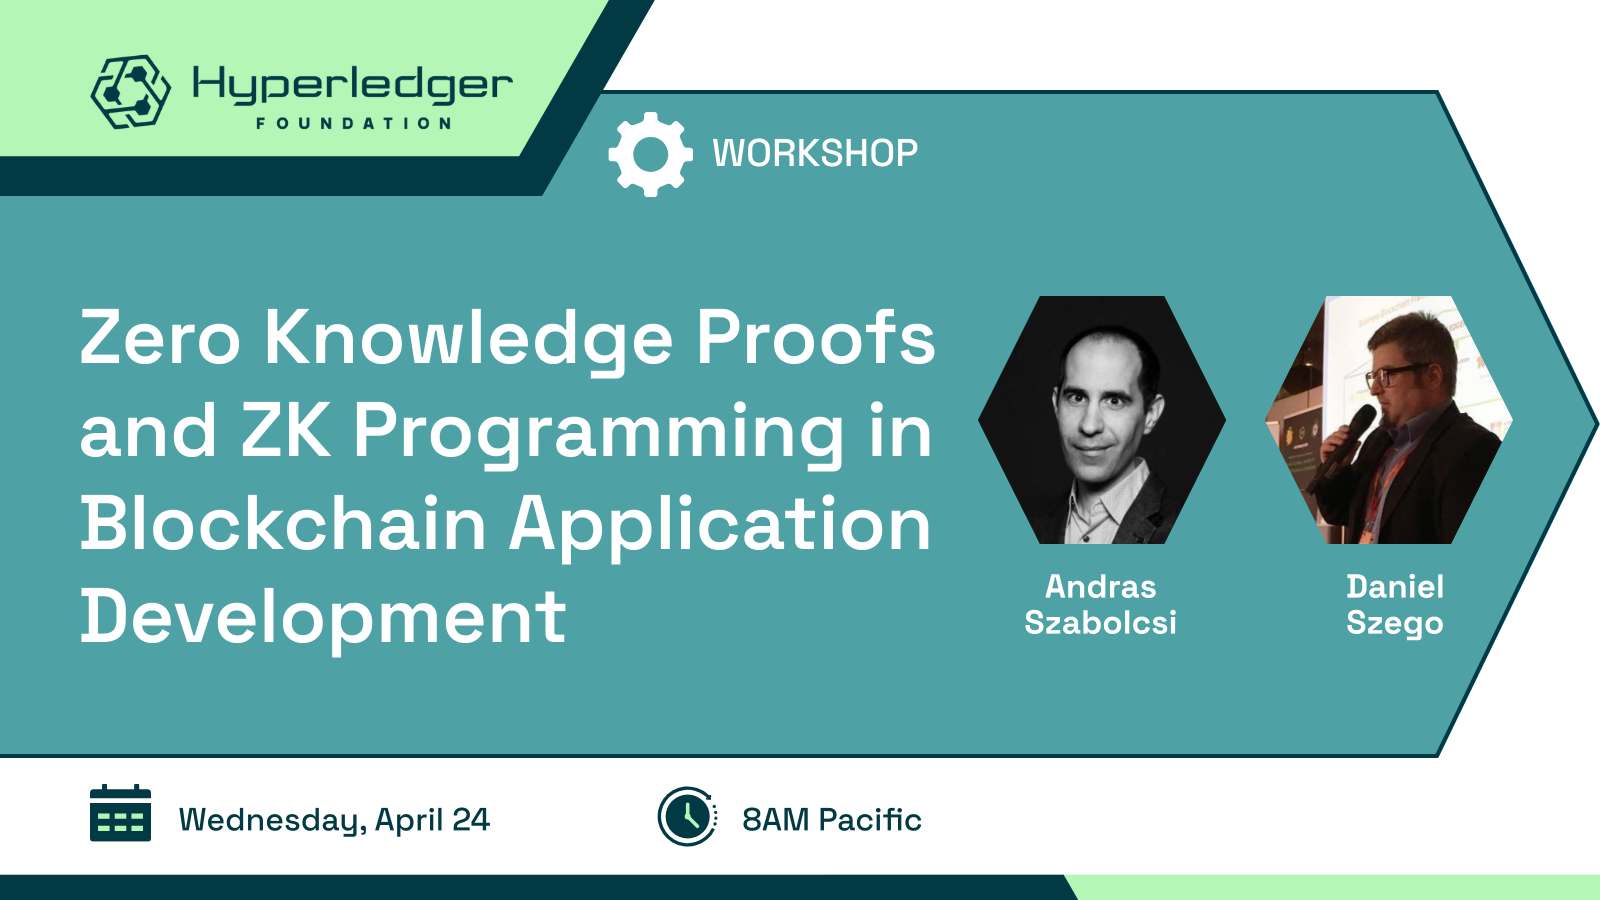 Zero Knowledge Proofs and ZK Programming in Blockchain Application Development featured image